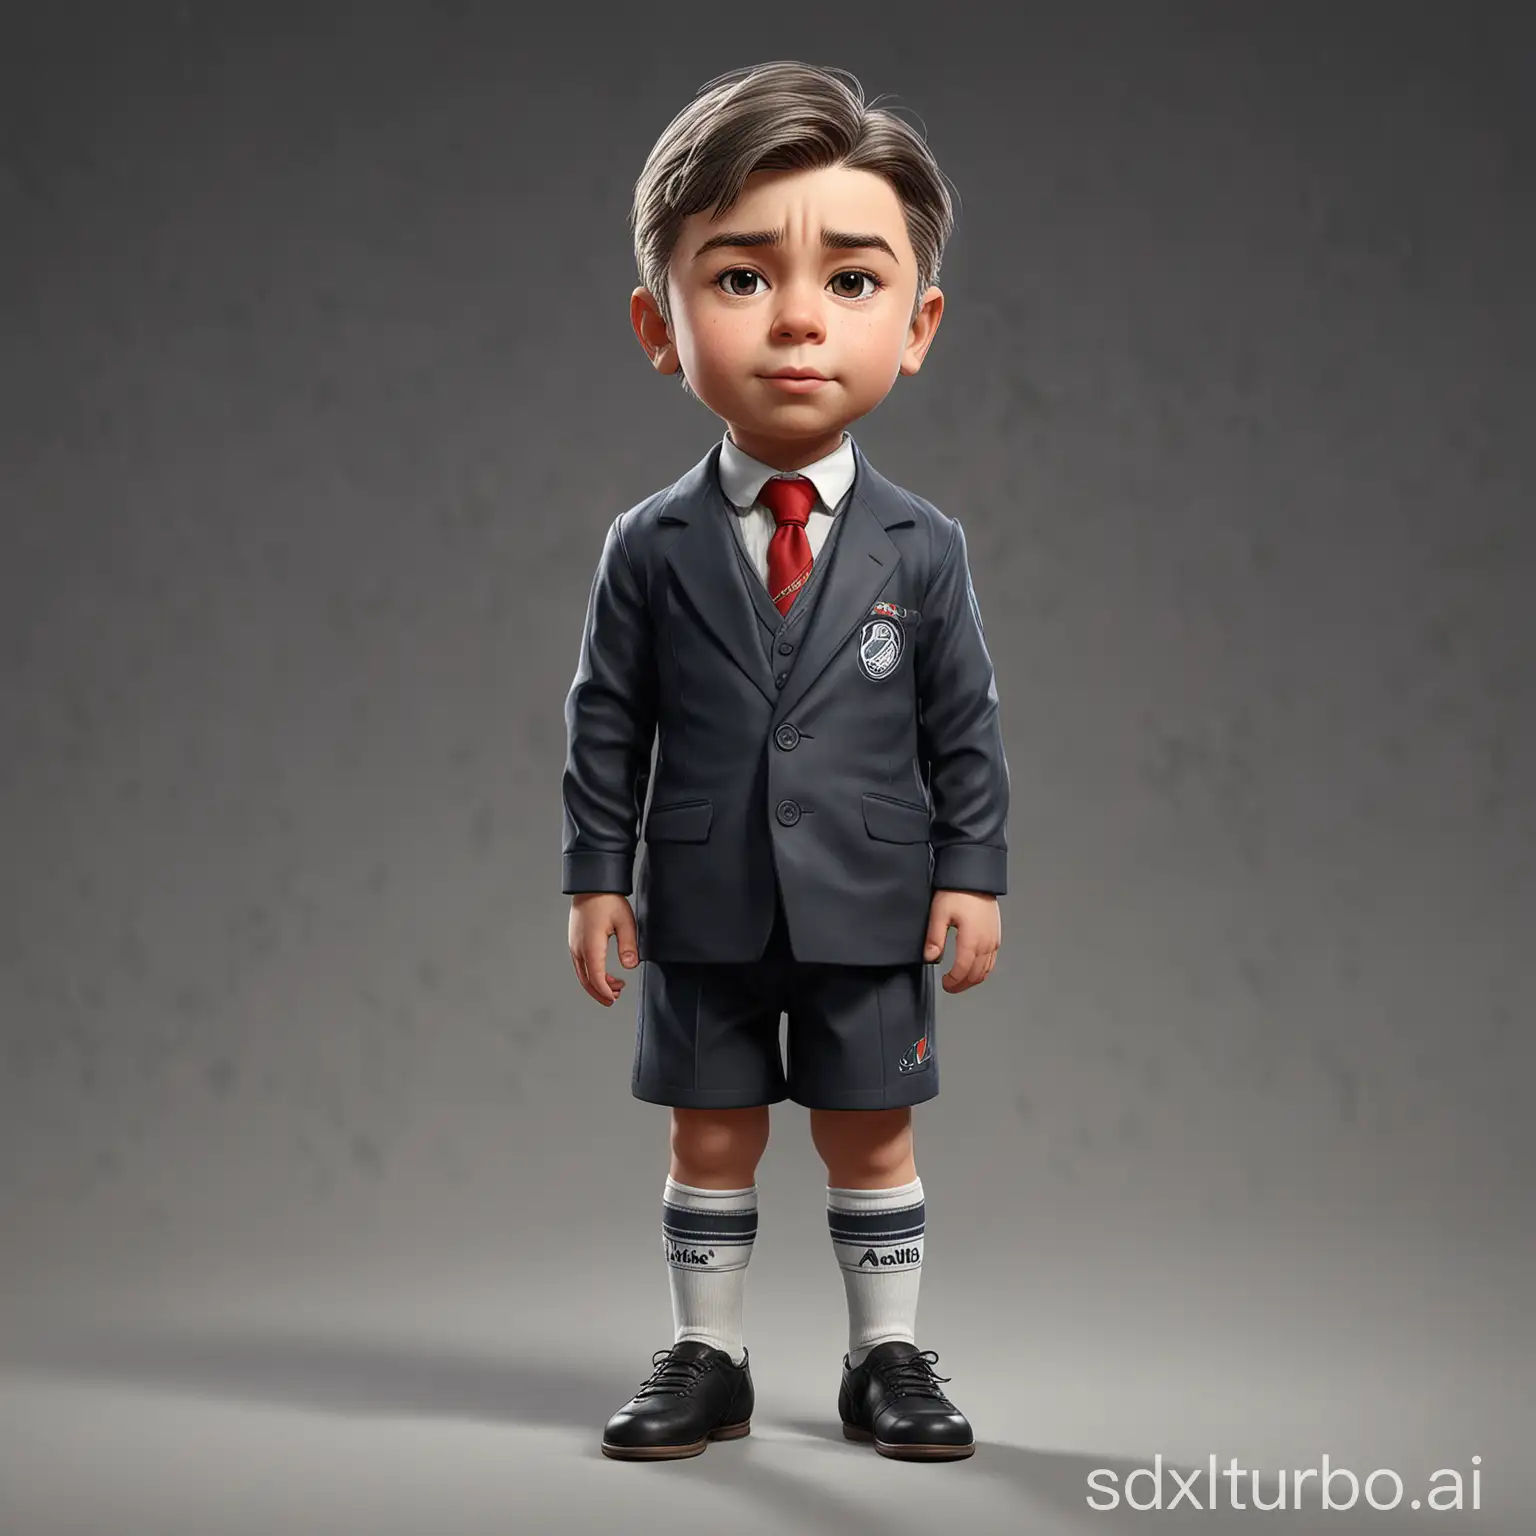 Little-Child-Carlo-Ancelotti-Adorable-Game-Character-Stands-Tall